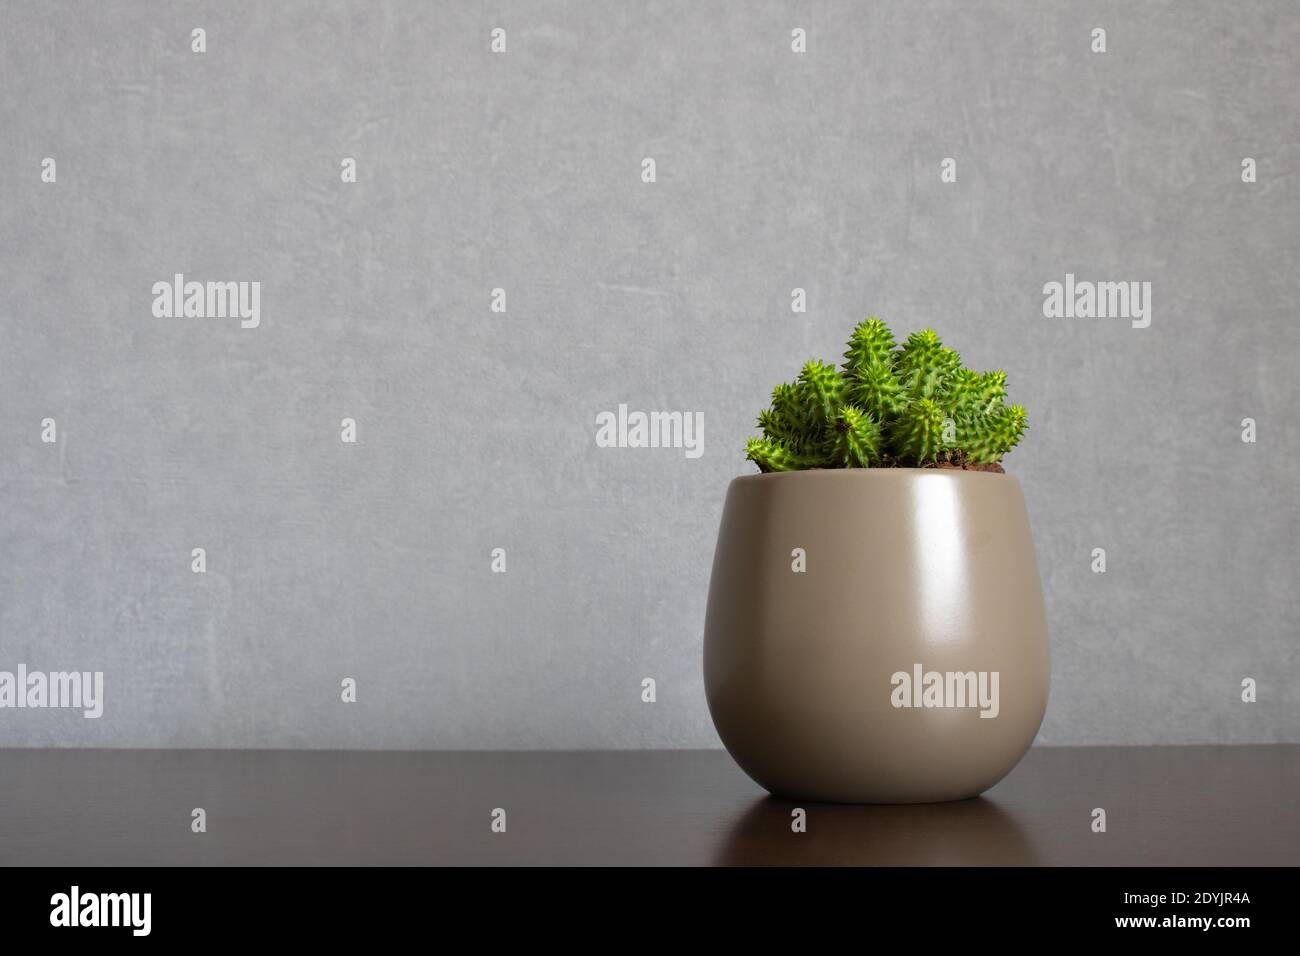 Green euphorbia susannae succulent plant growing in ceramic vase isolated on clean background placed off-center on shelf. Stock Photo